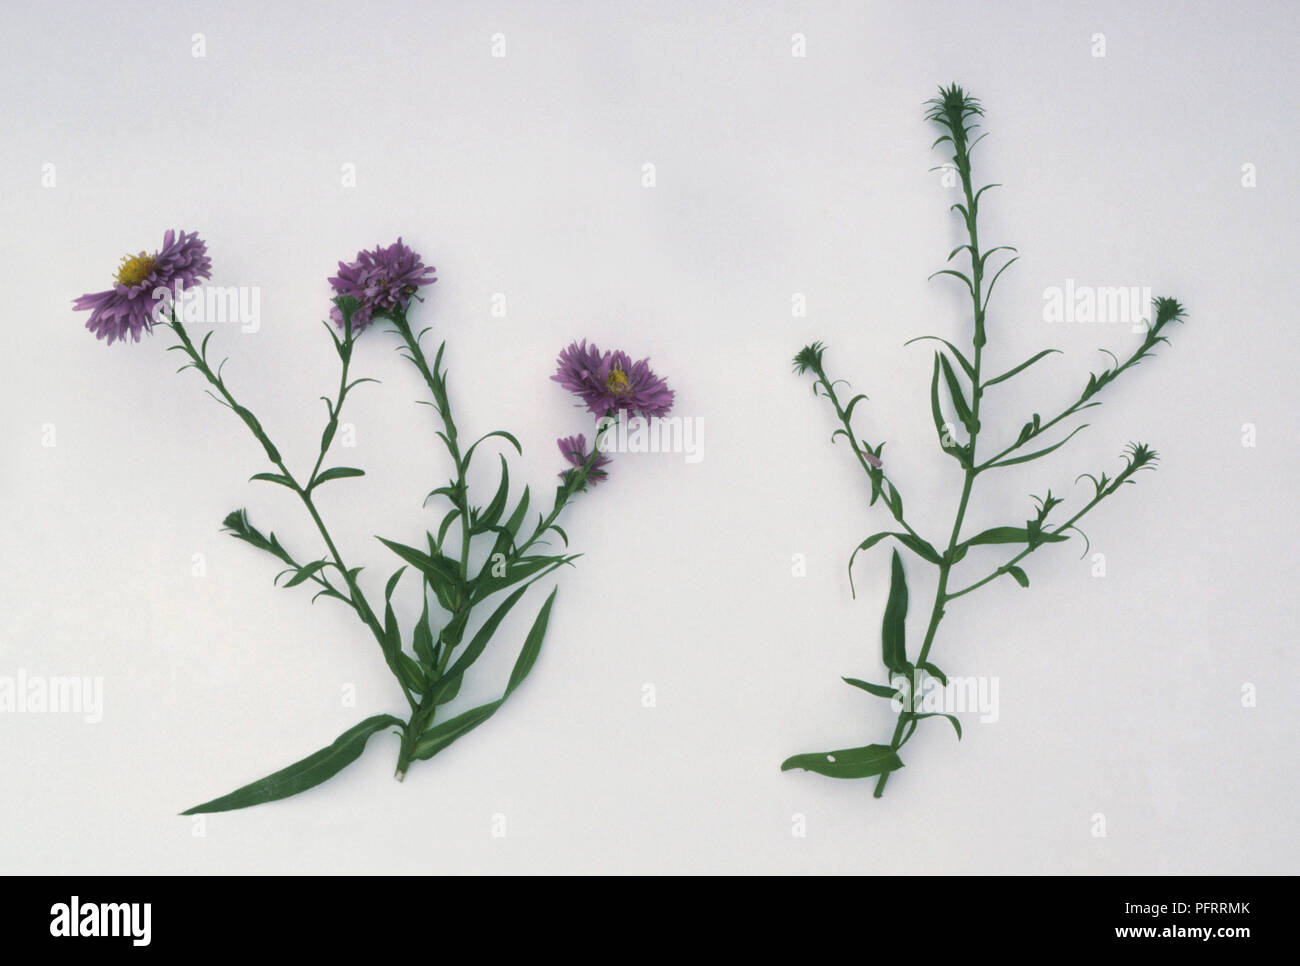 Flower Stem Of Healthy Aster Michaelmas Daisy And Stem With Flowers Distorted By Mites Stock Photo Alamy